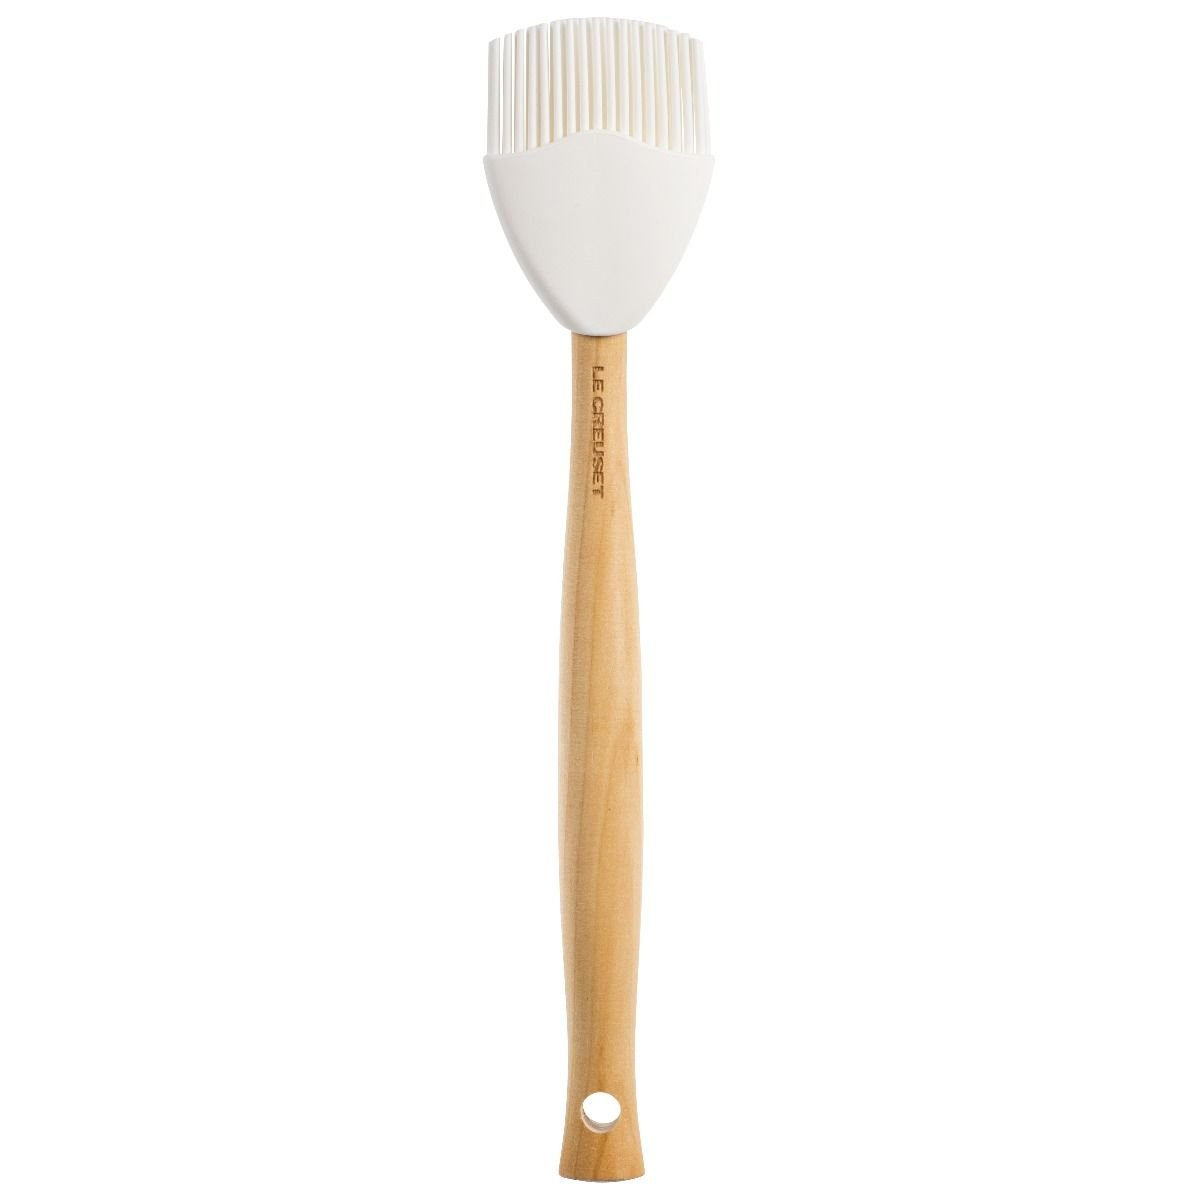 Le Creuset Cleaning Brush Product Review